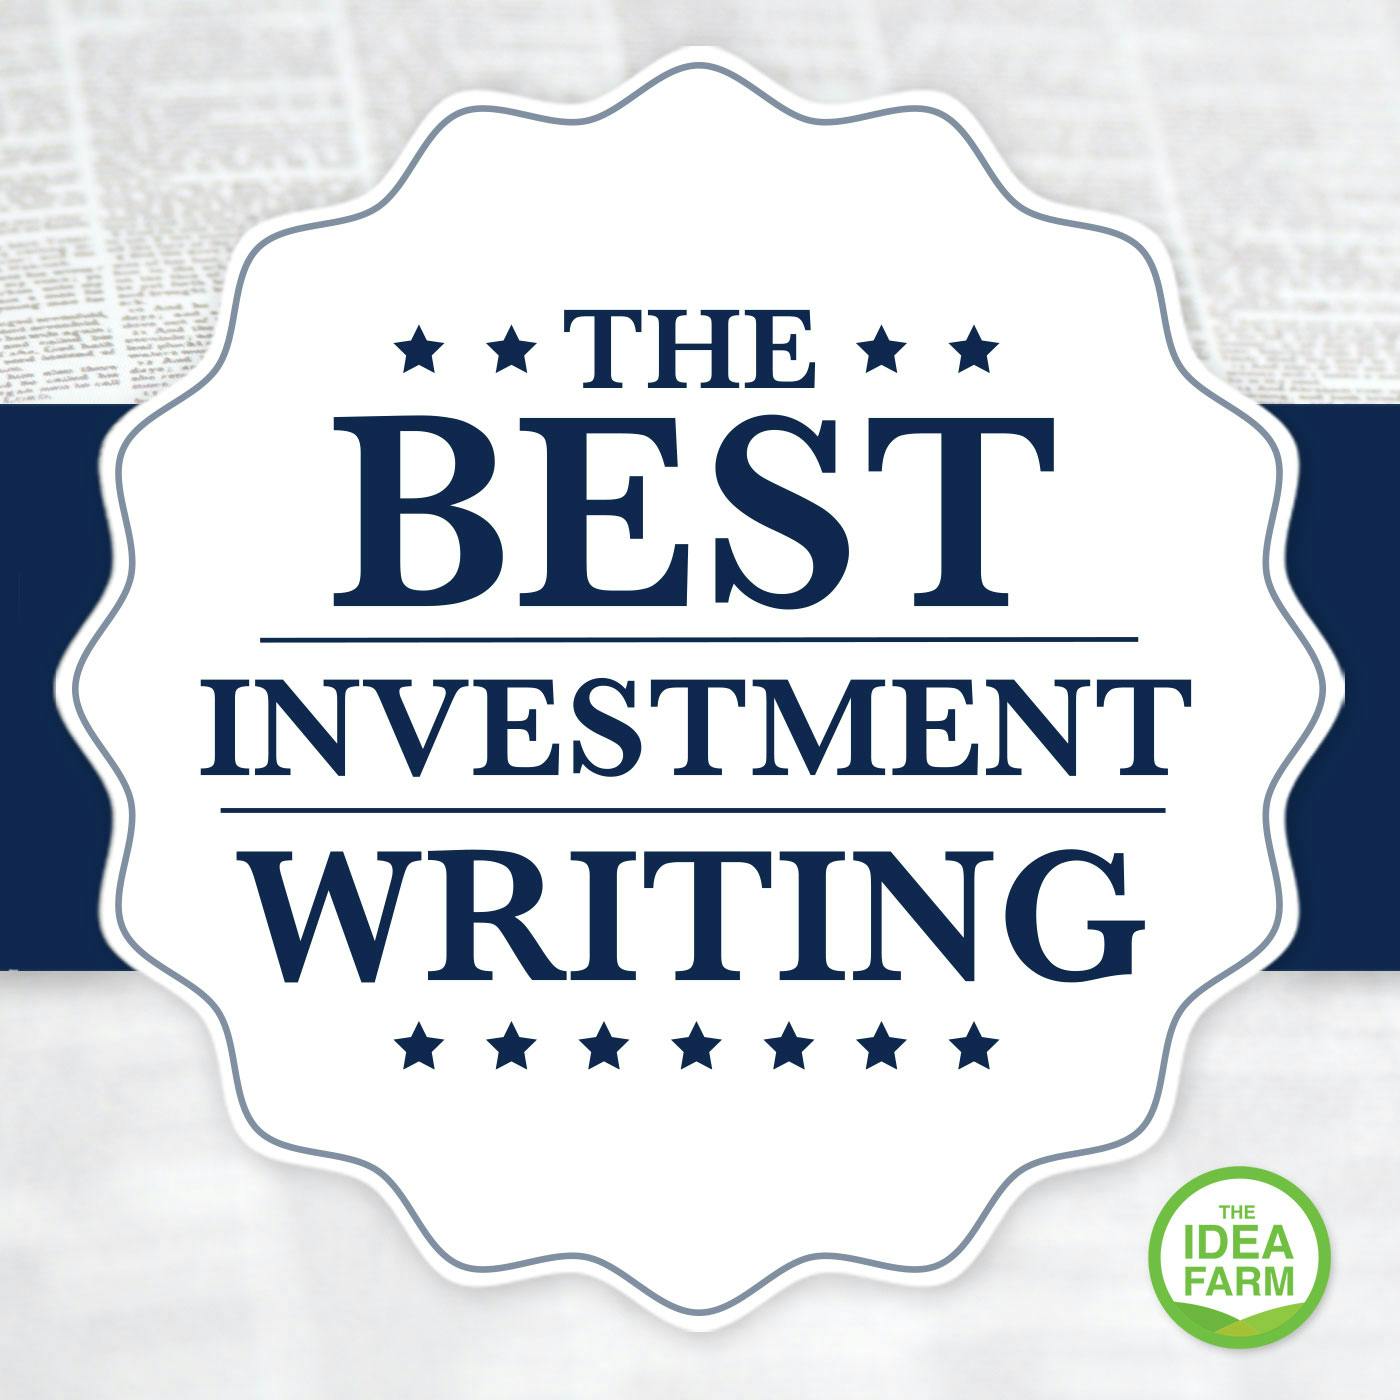 The Best Investment Writing Volume 3: Jack Forehand – The Case Against Value Stocks